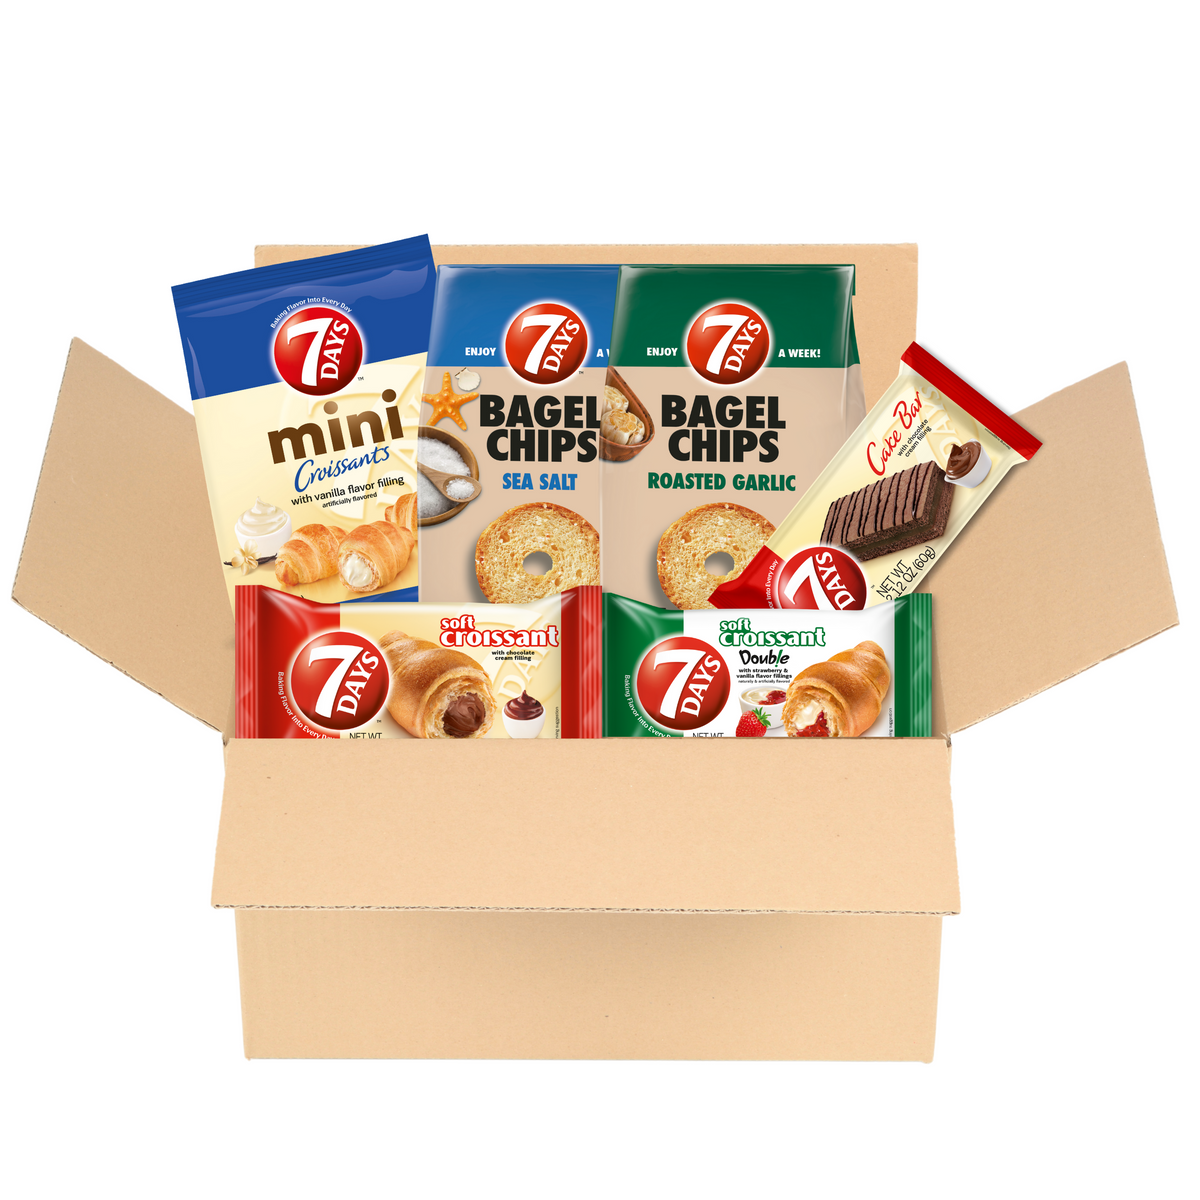 bundle pack with mini croissants, bagel chips, cake bars, and soft croissants